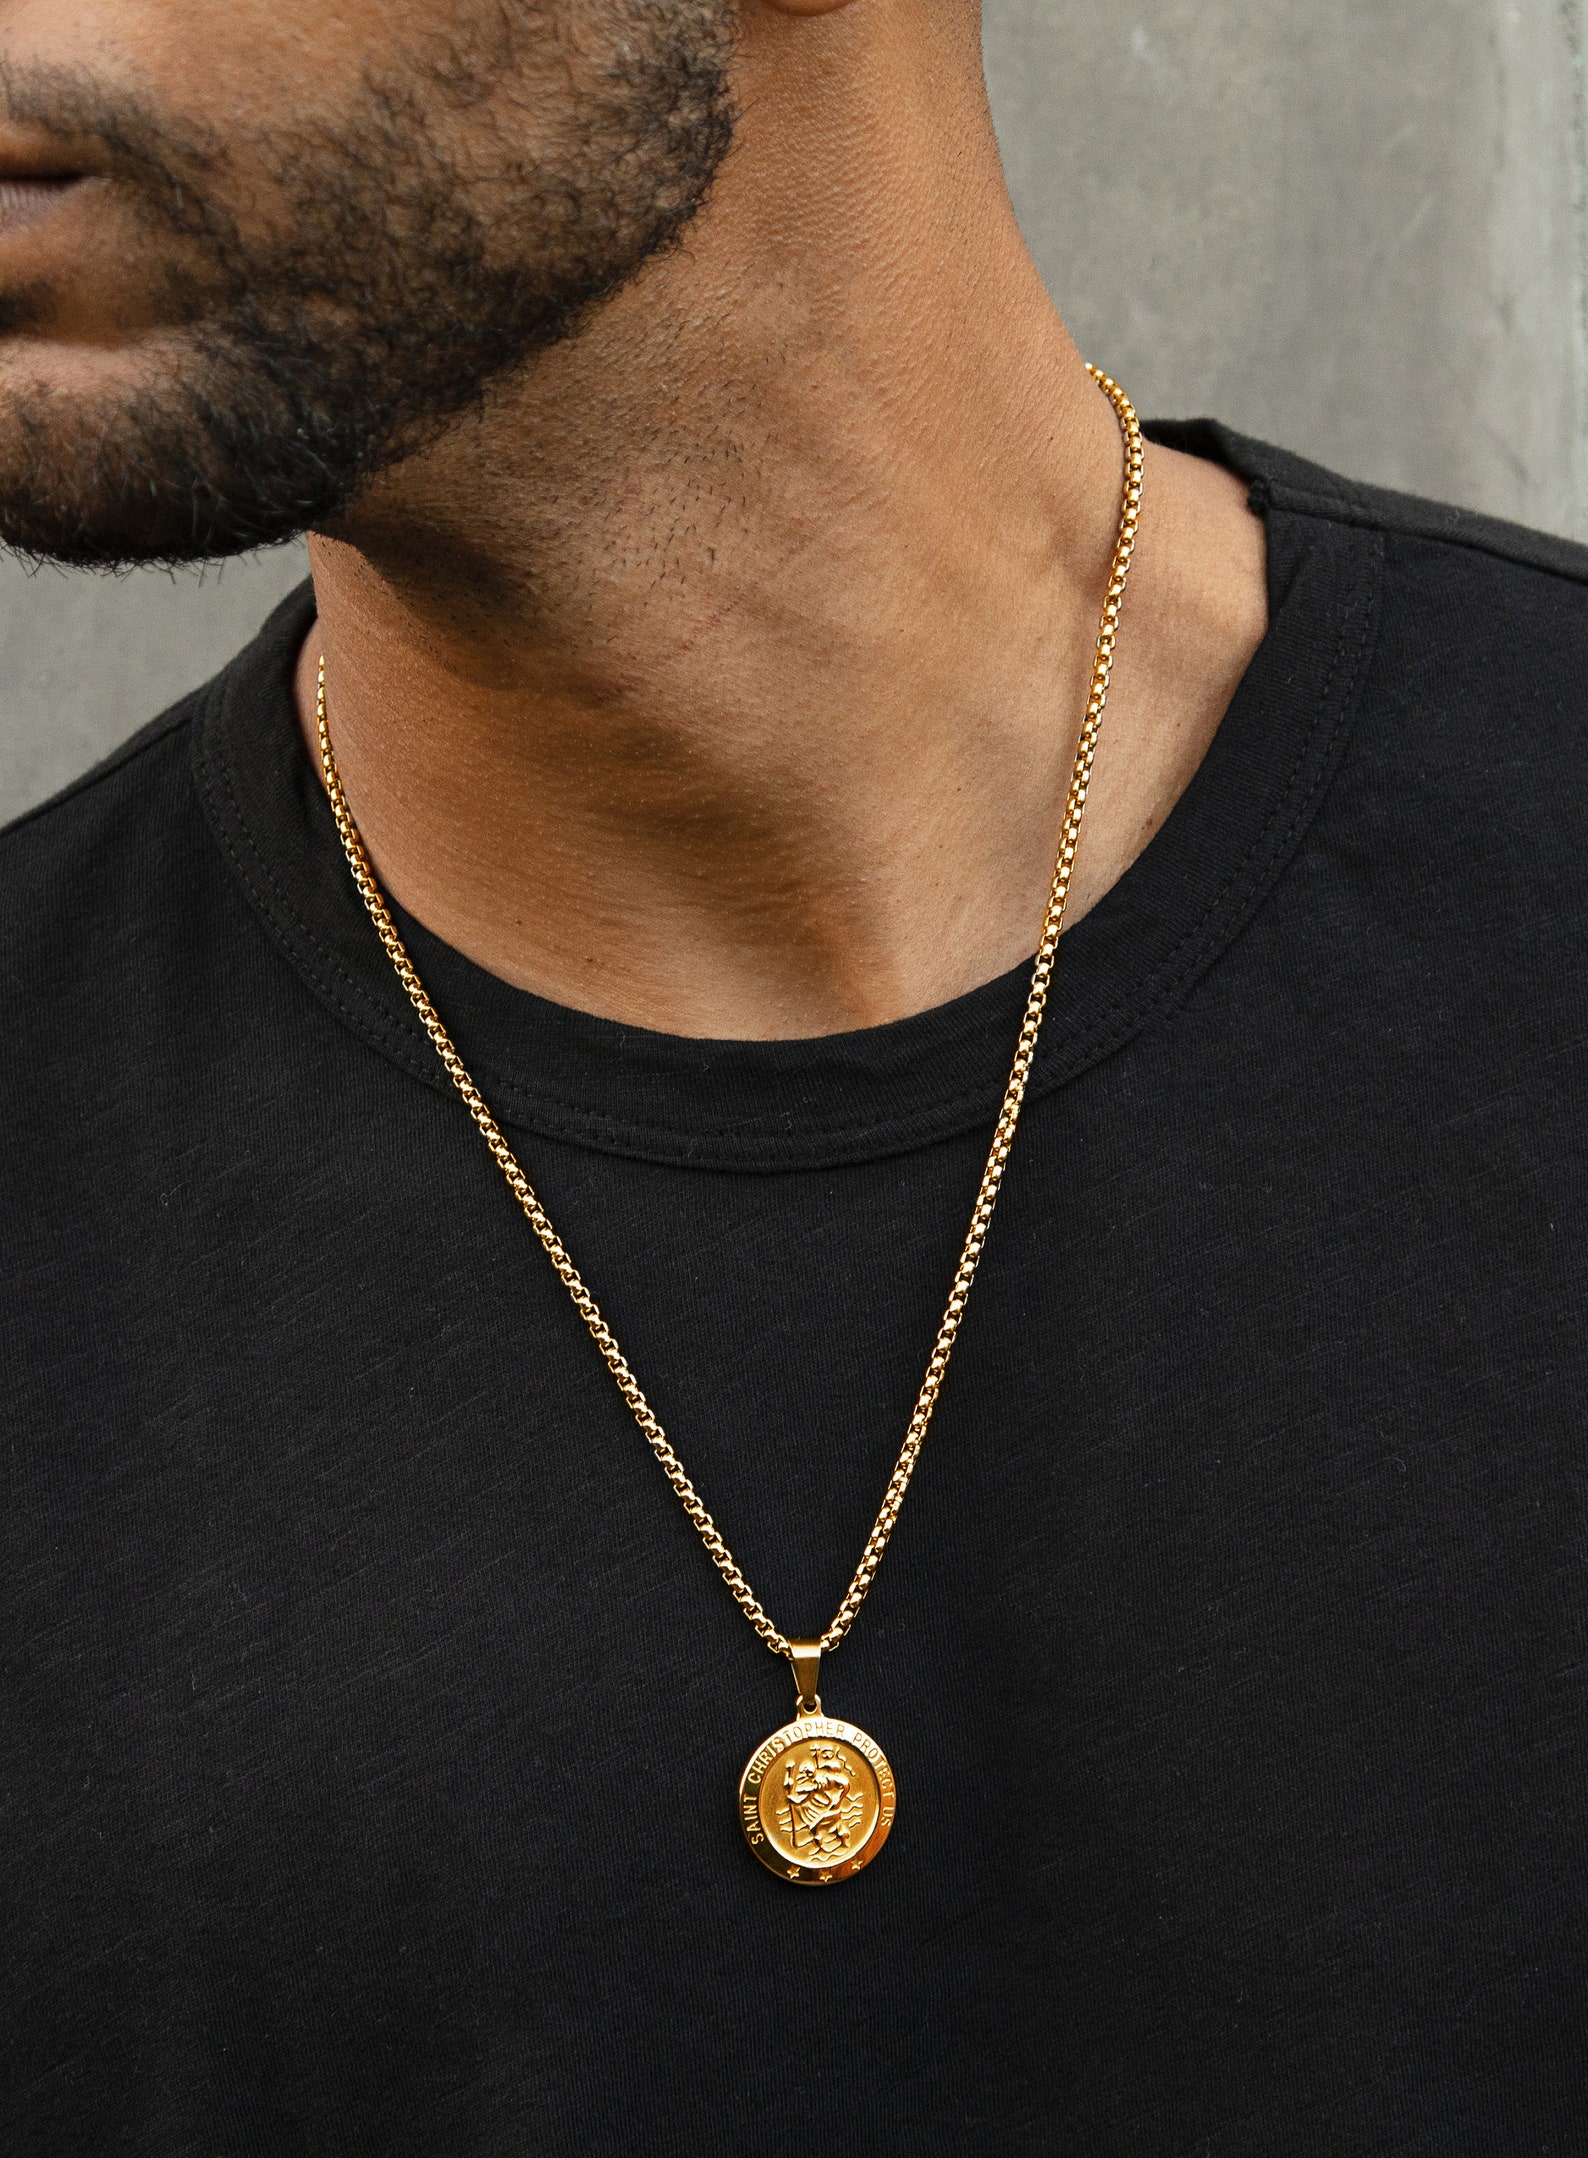 Men's Necklace 14k Gold Plated Stainless Steel Saint | Etsy